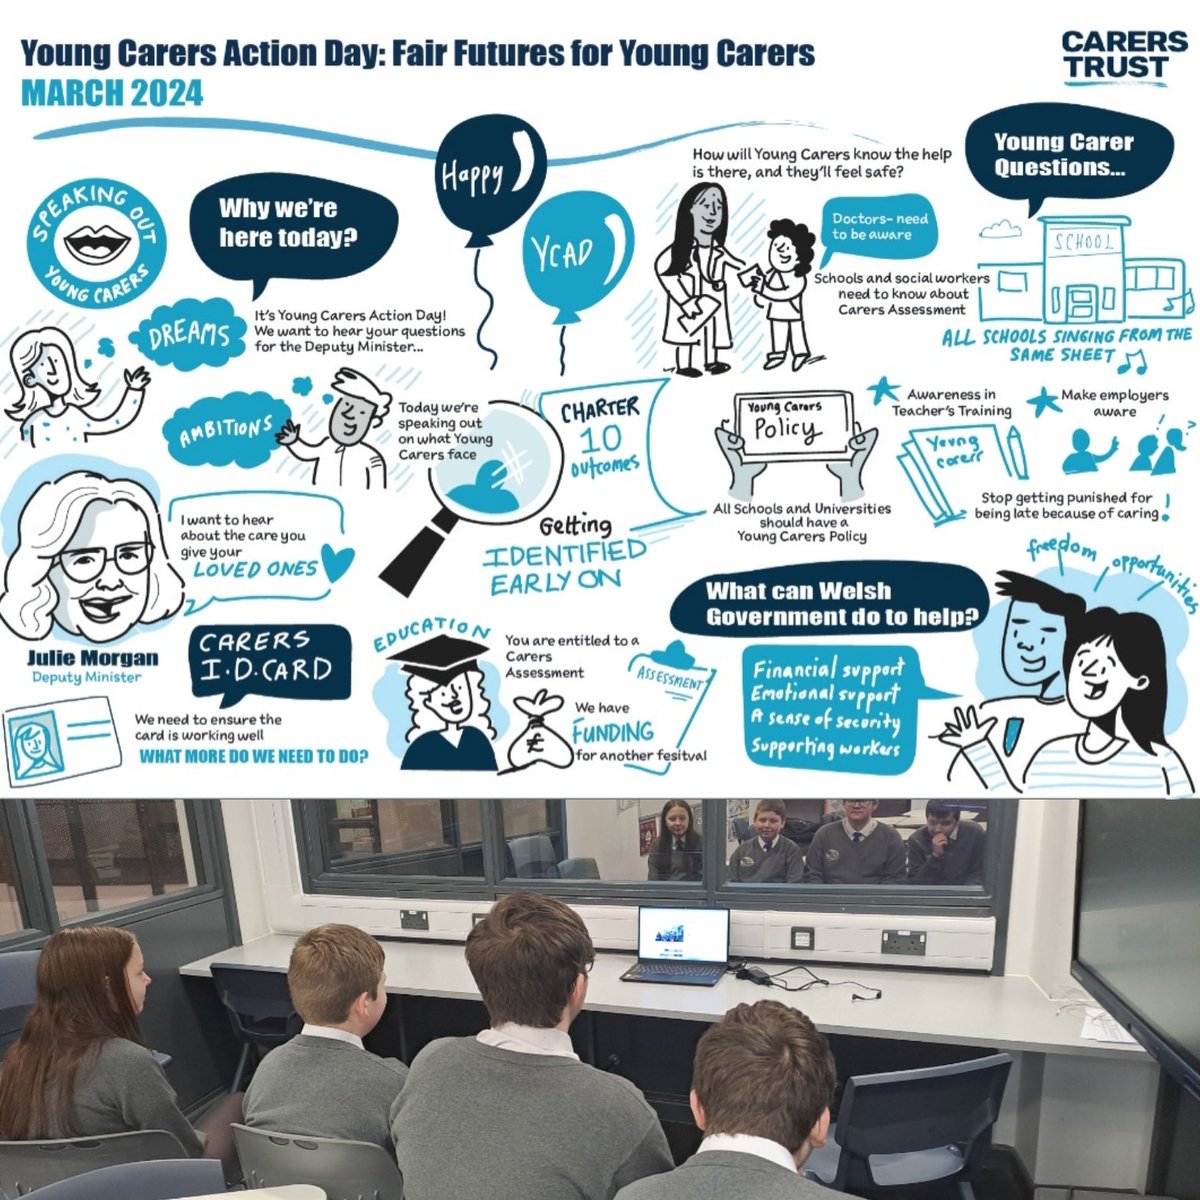 Young Carers from @CCYD_school took part in an online meeting with Julie Morgan - Deputy Minister last Wednesday to discuss what Welsh Government can do to help this under represented group of young people for Young Carers Action Day. Here are the visual minutes from the meeting.